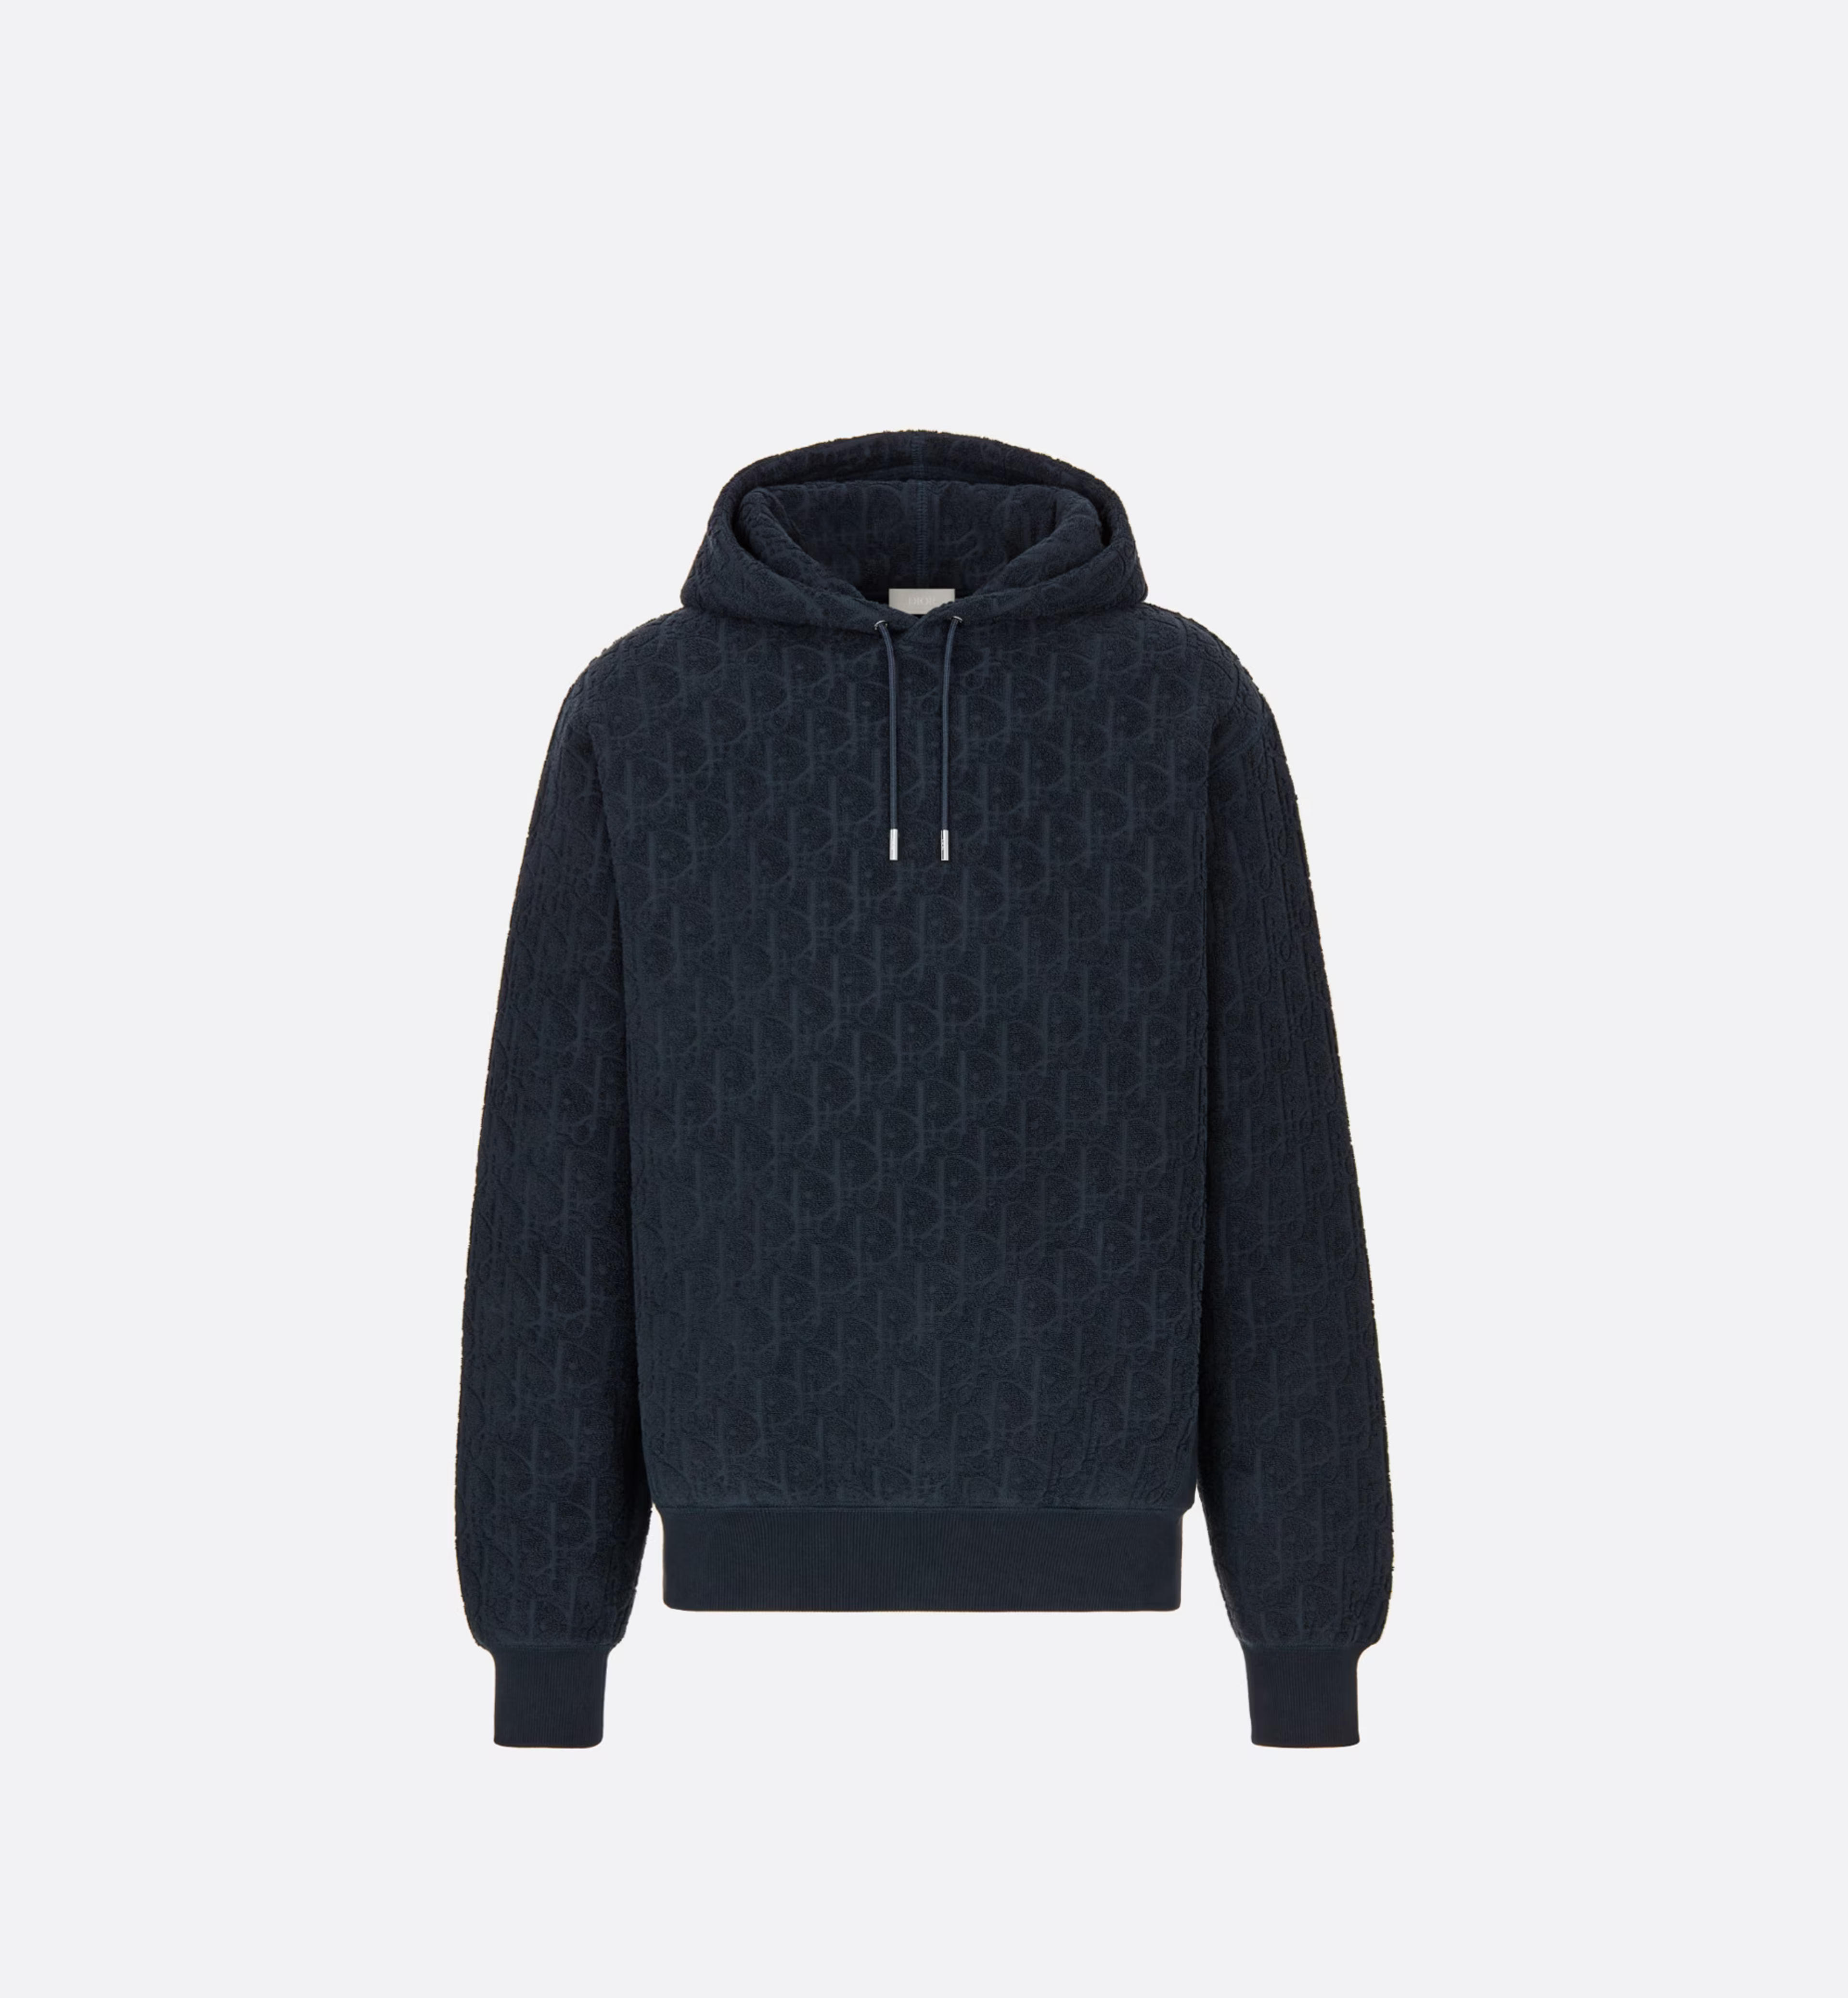 Dior Oblique Hooded Sweatshirt, Relaxed Fit Navy Blue Terry Cotton Jacquard | DIOR